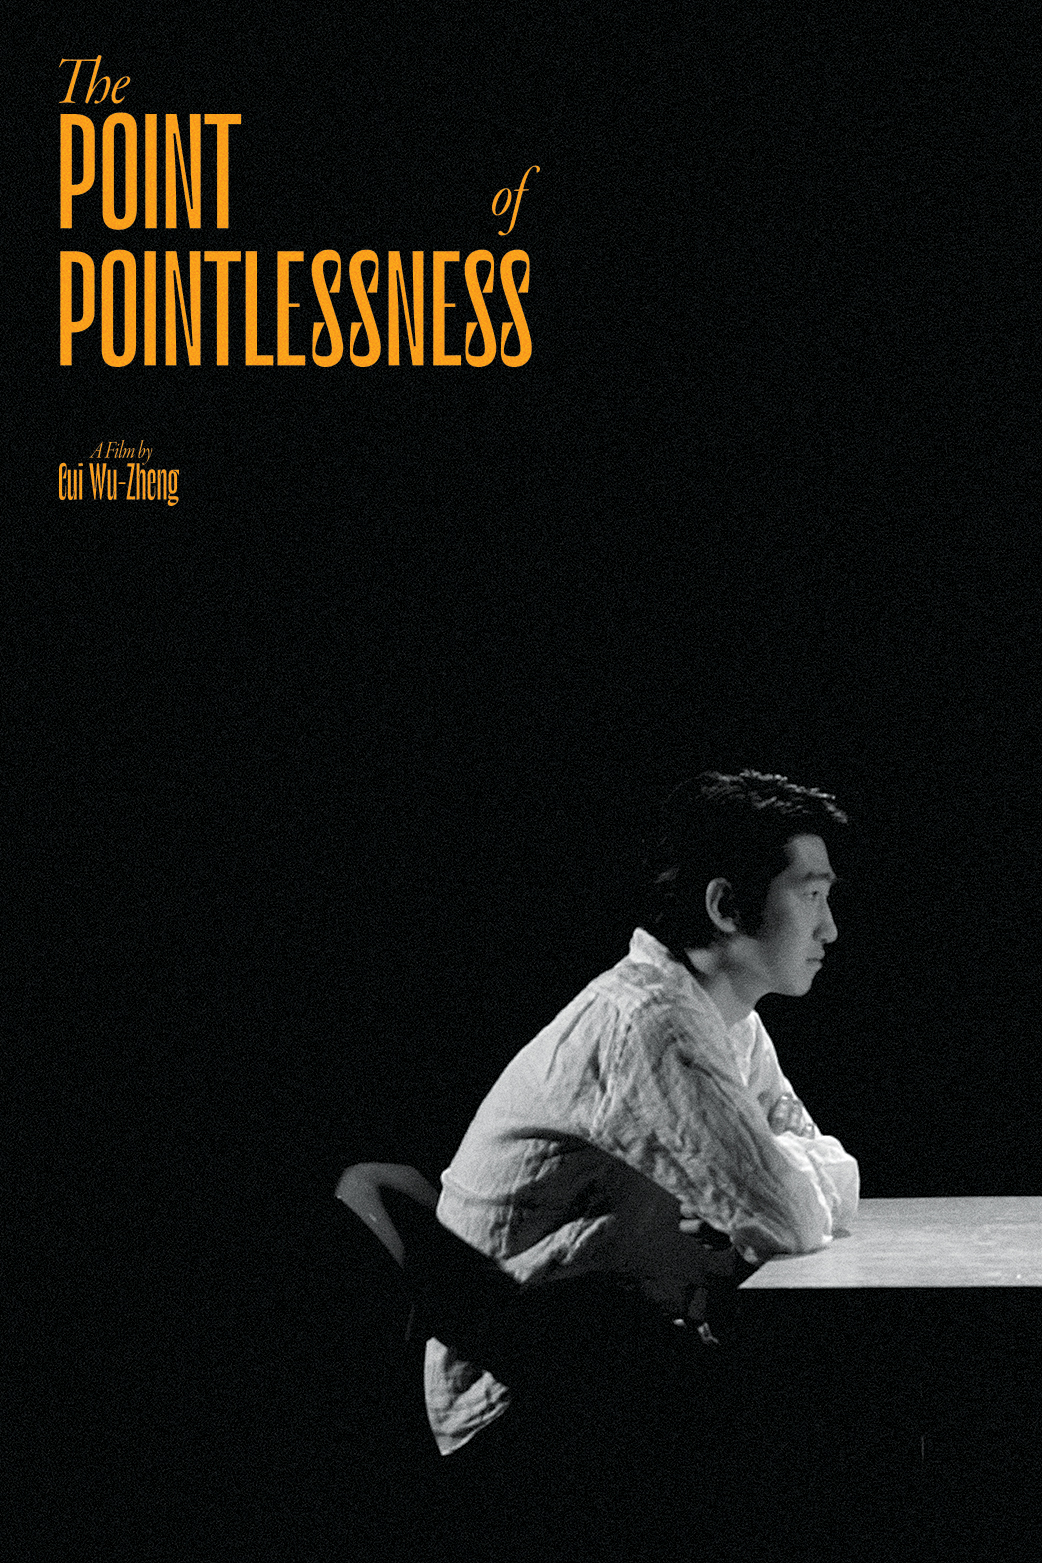 The Point of Pointlessness